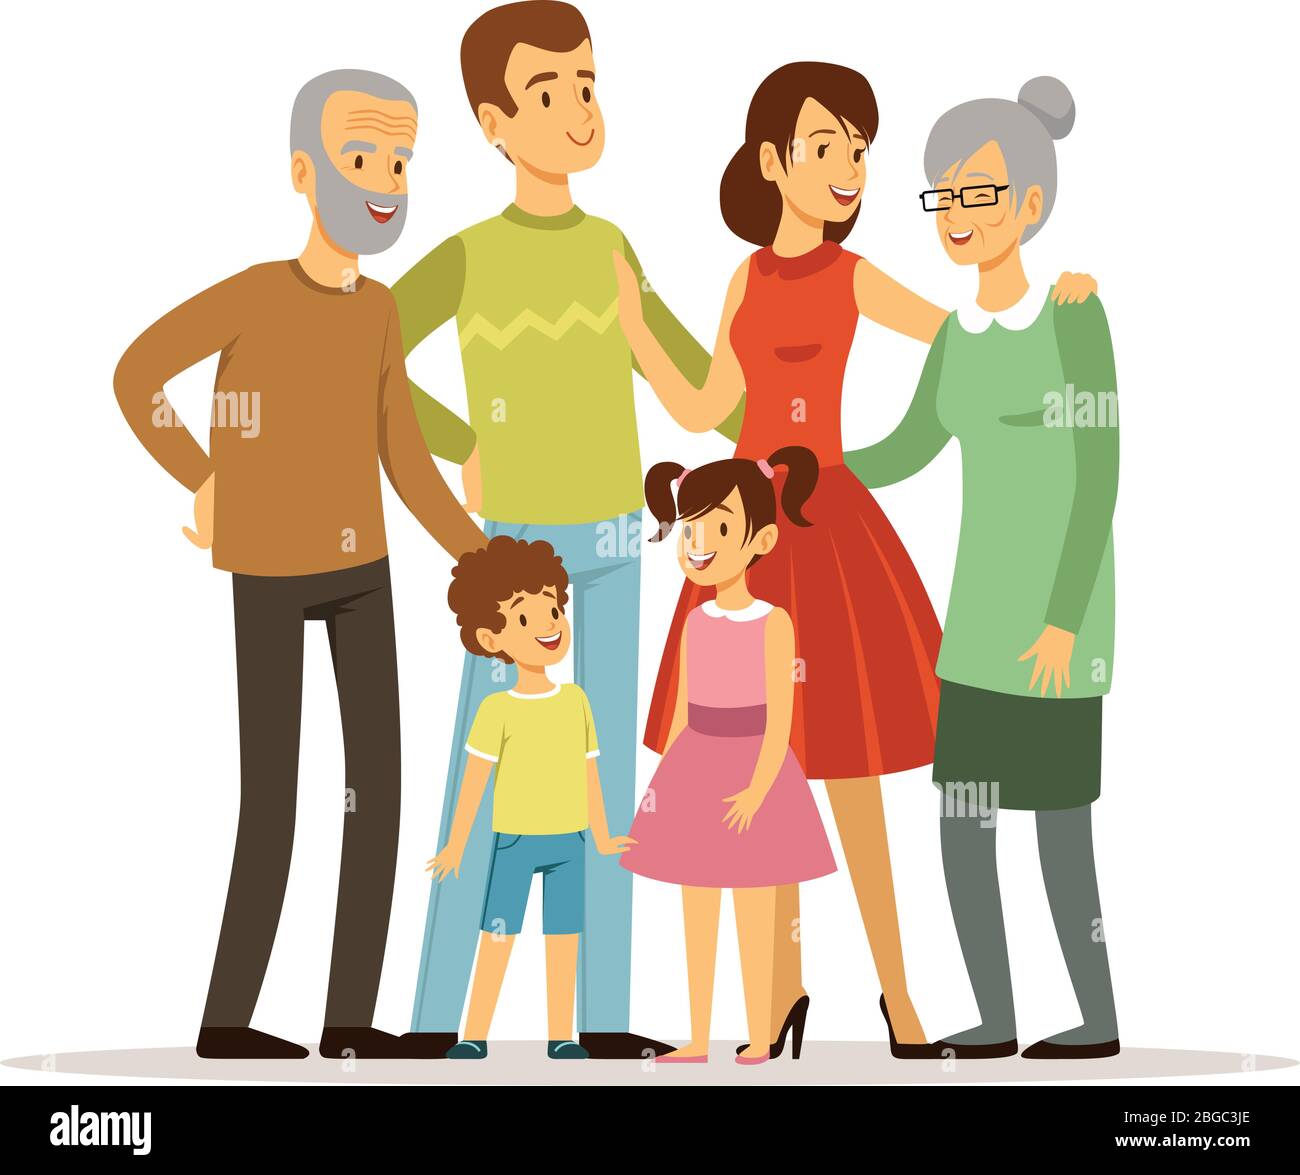 Vector illustration of big family with mother, father, grandmother and grandfather. Smiling peoples standing at action poses Stock Vector